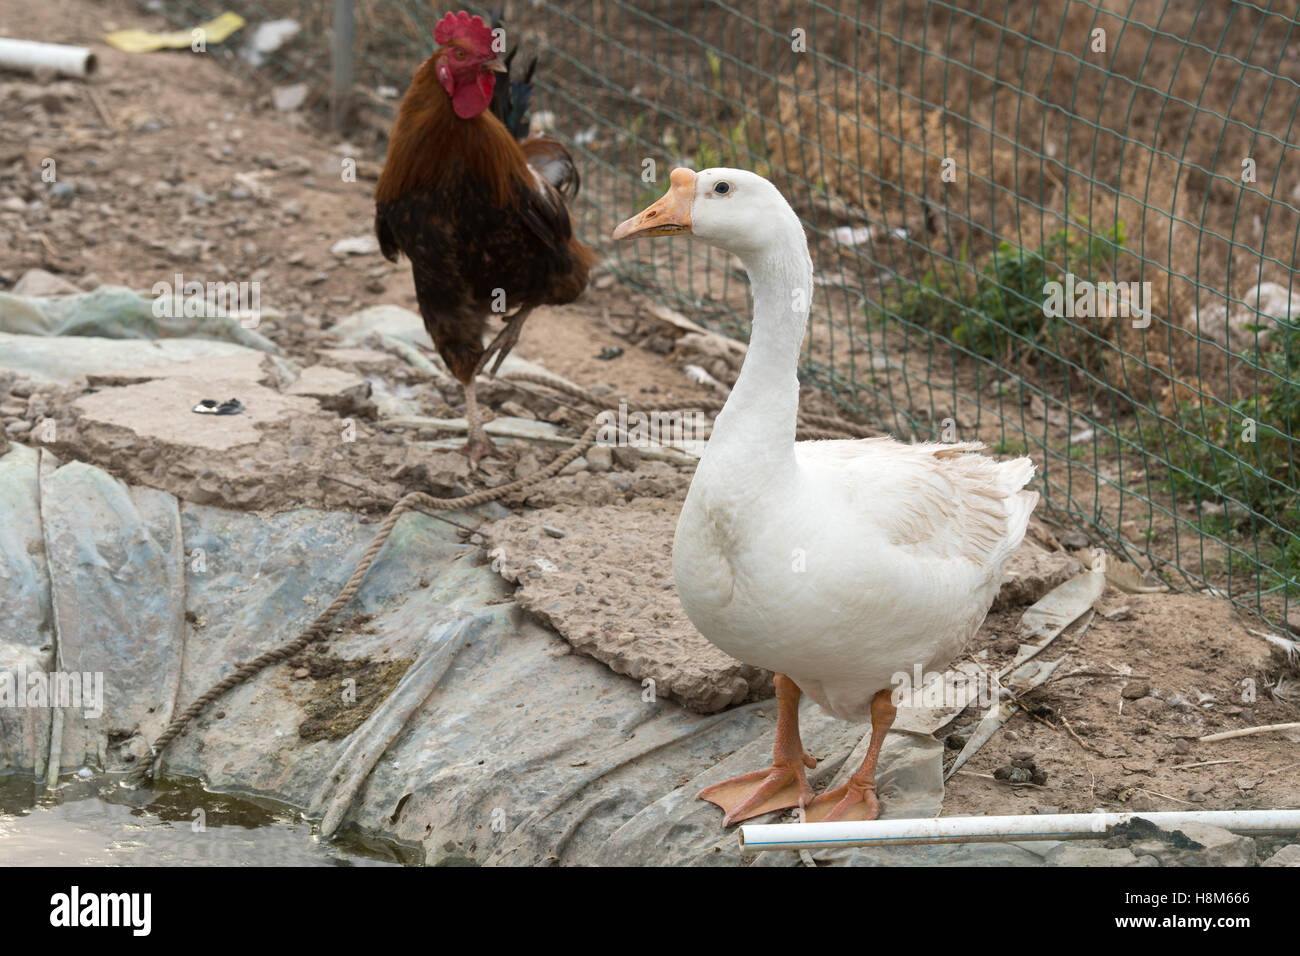 Beijing, China - A domesticated White Chinese goose and a rooster on a farm near Beijing, China. Stock Photo